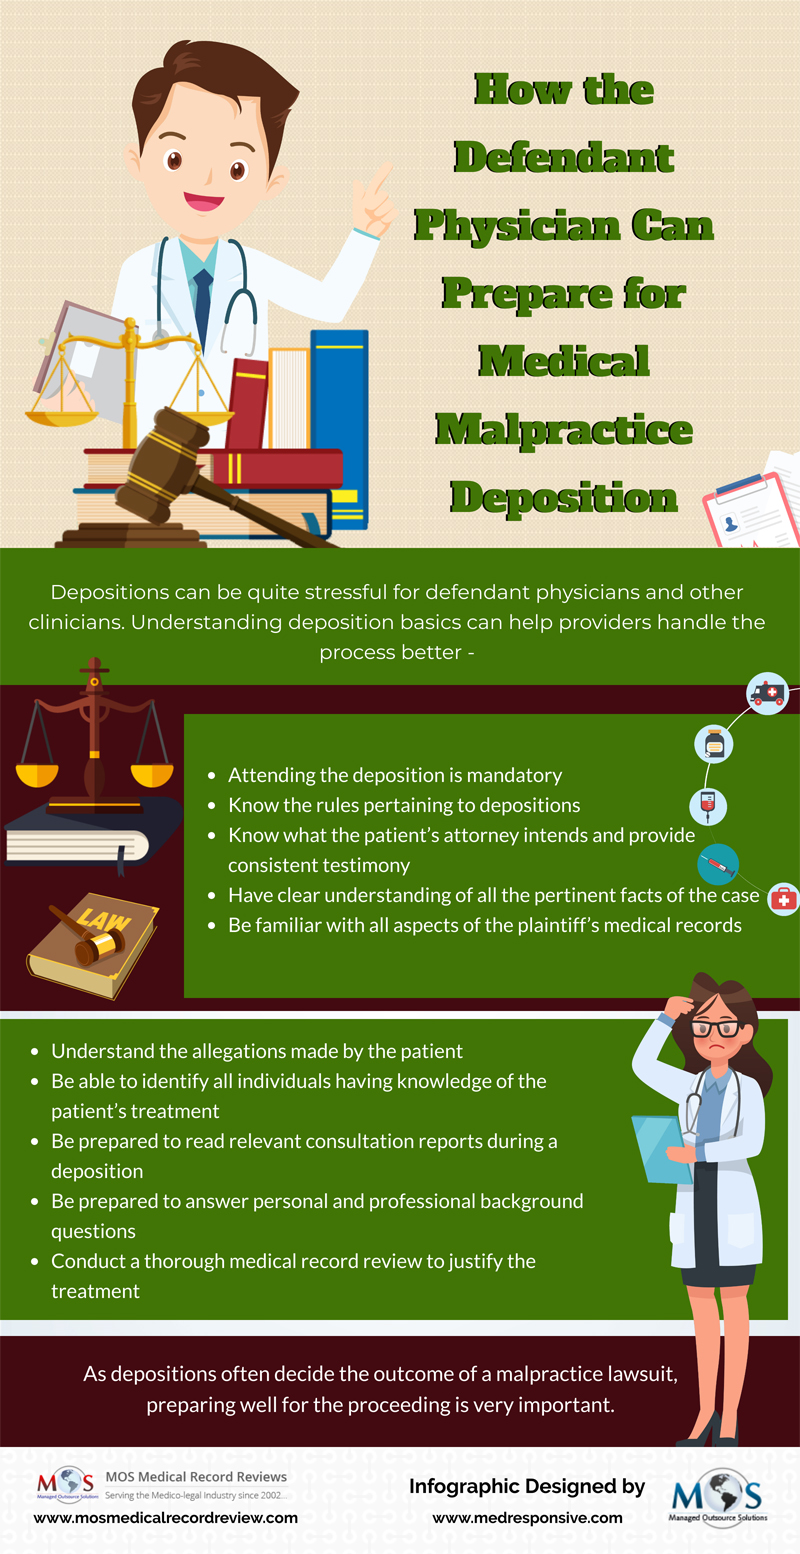 How the Defendant Physician Can Prepare for Medical Malpractice Deposition